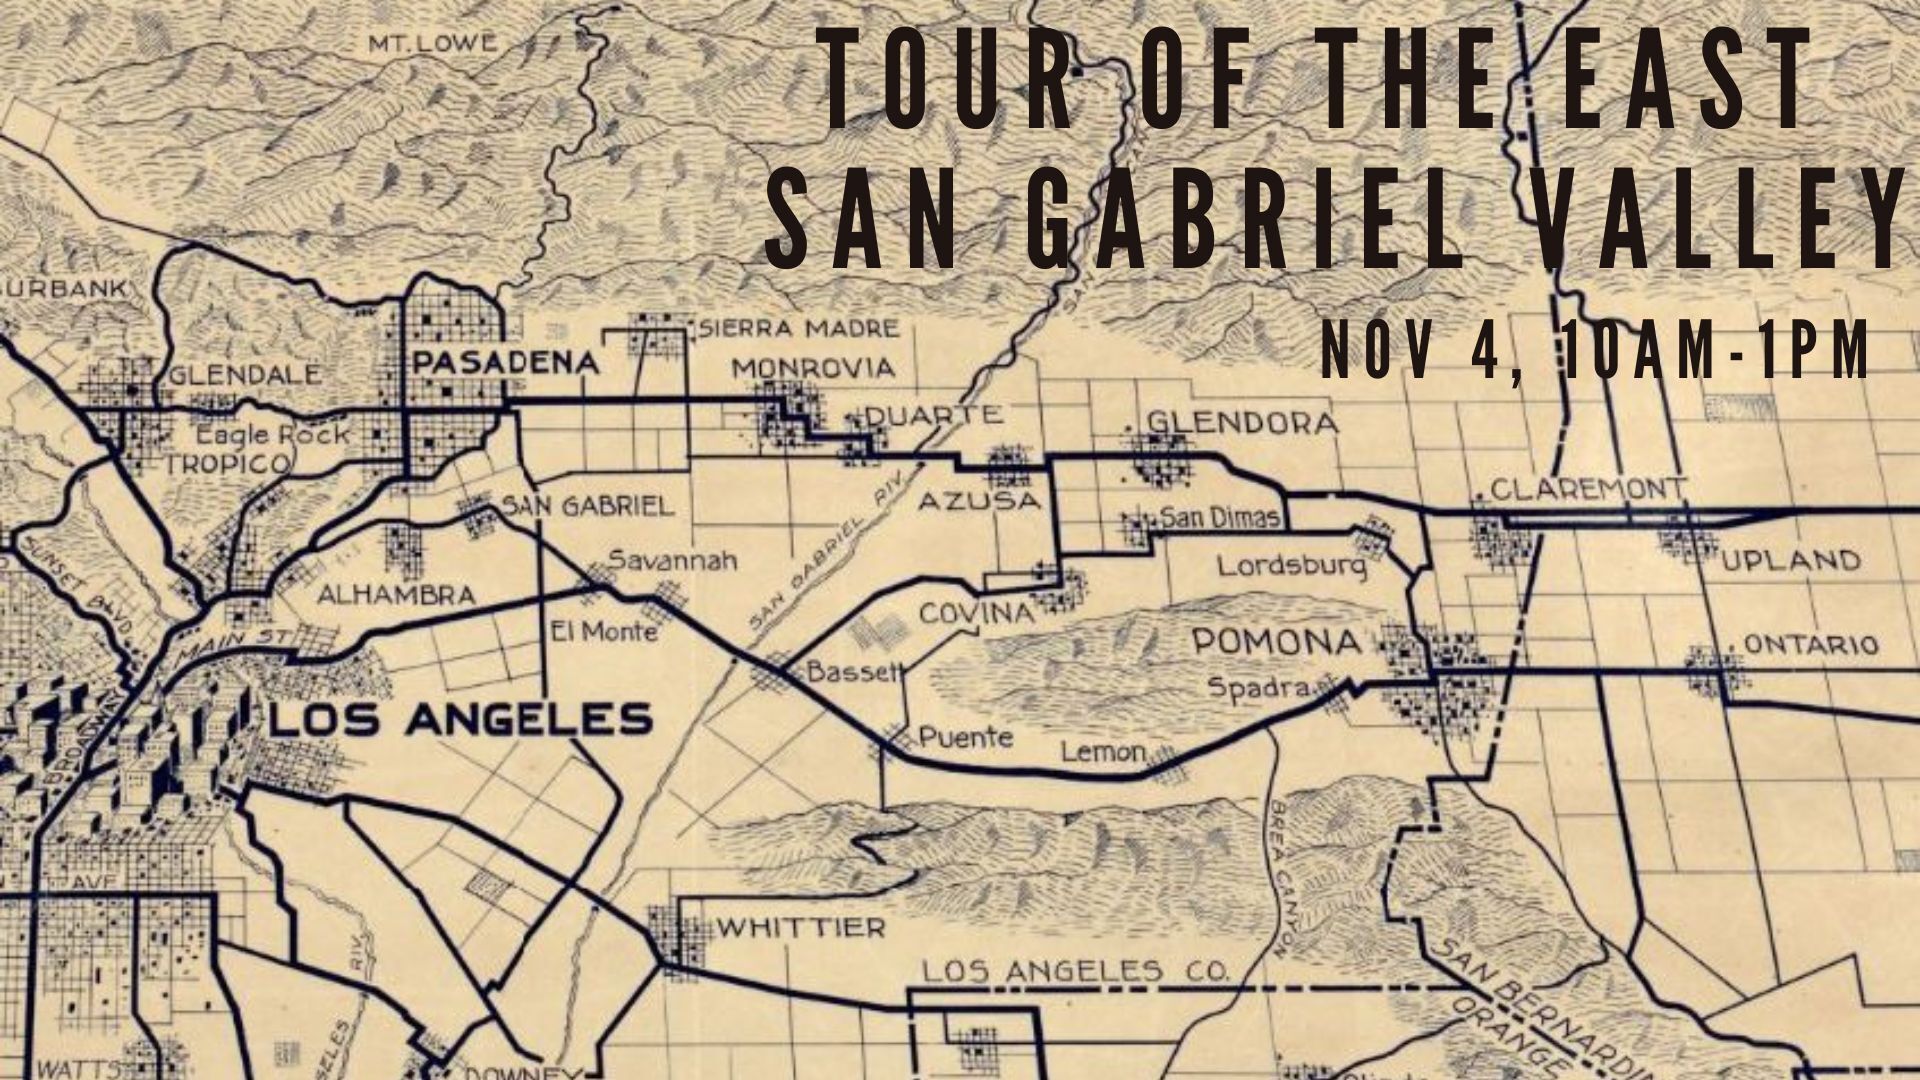 Map showing the tour of east san gabriel valley